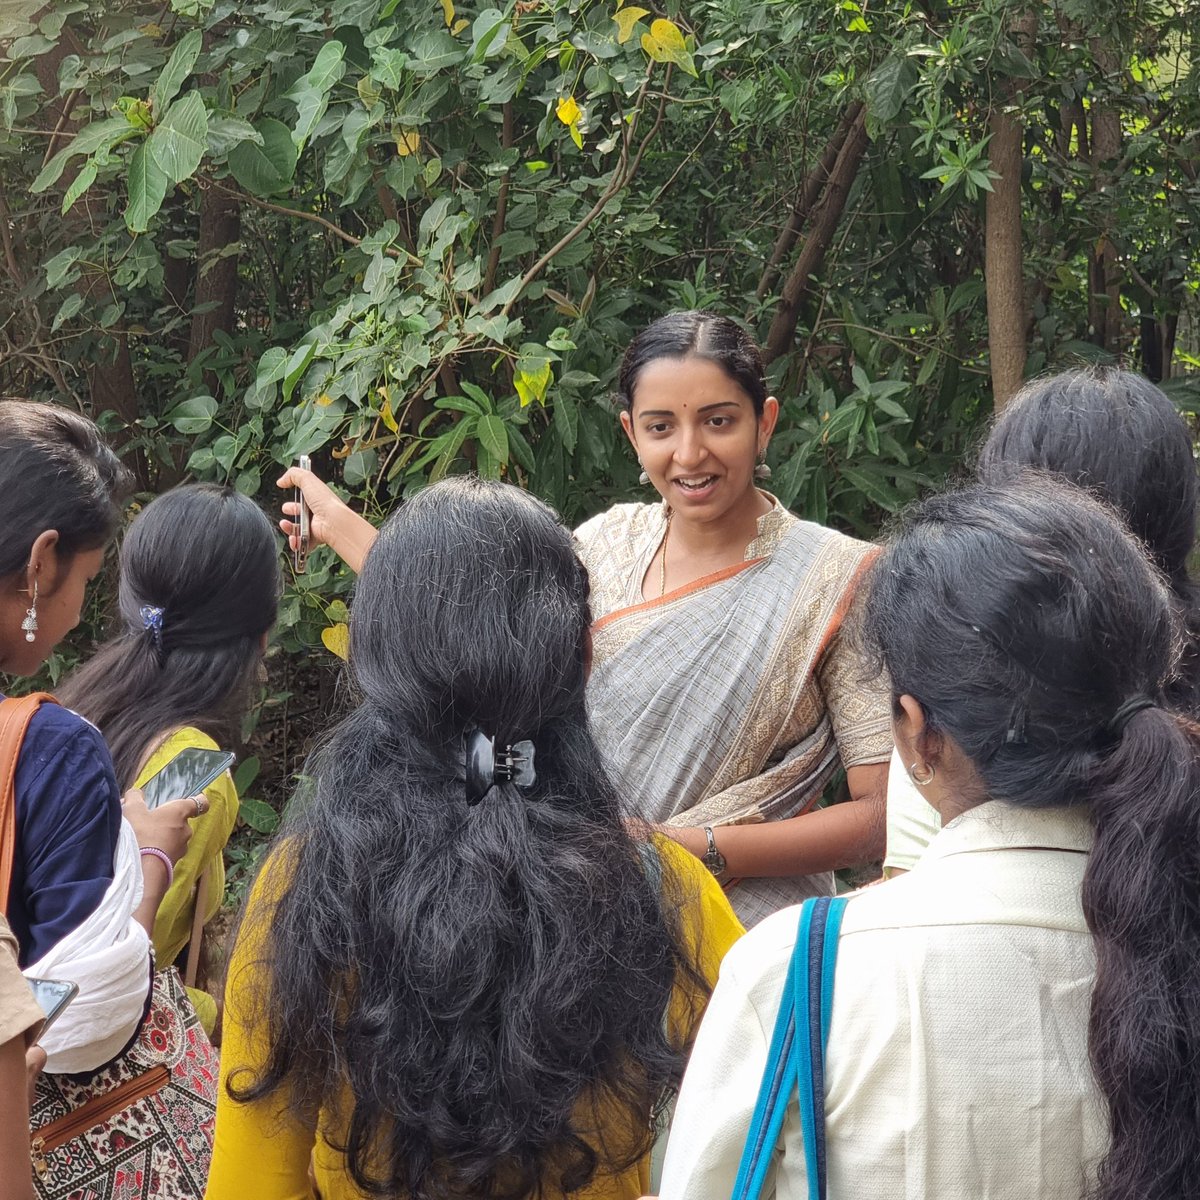 #GreenWalk session with the students of #DGVaishanvCollege. Students attended both awareness and hands on training session for 2 days on environmental & sustainable practices through #VidhaiVidhaipom 's skill development initiative.